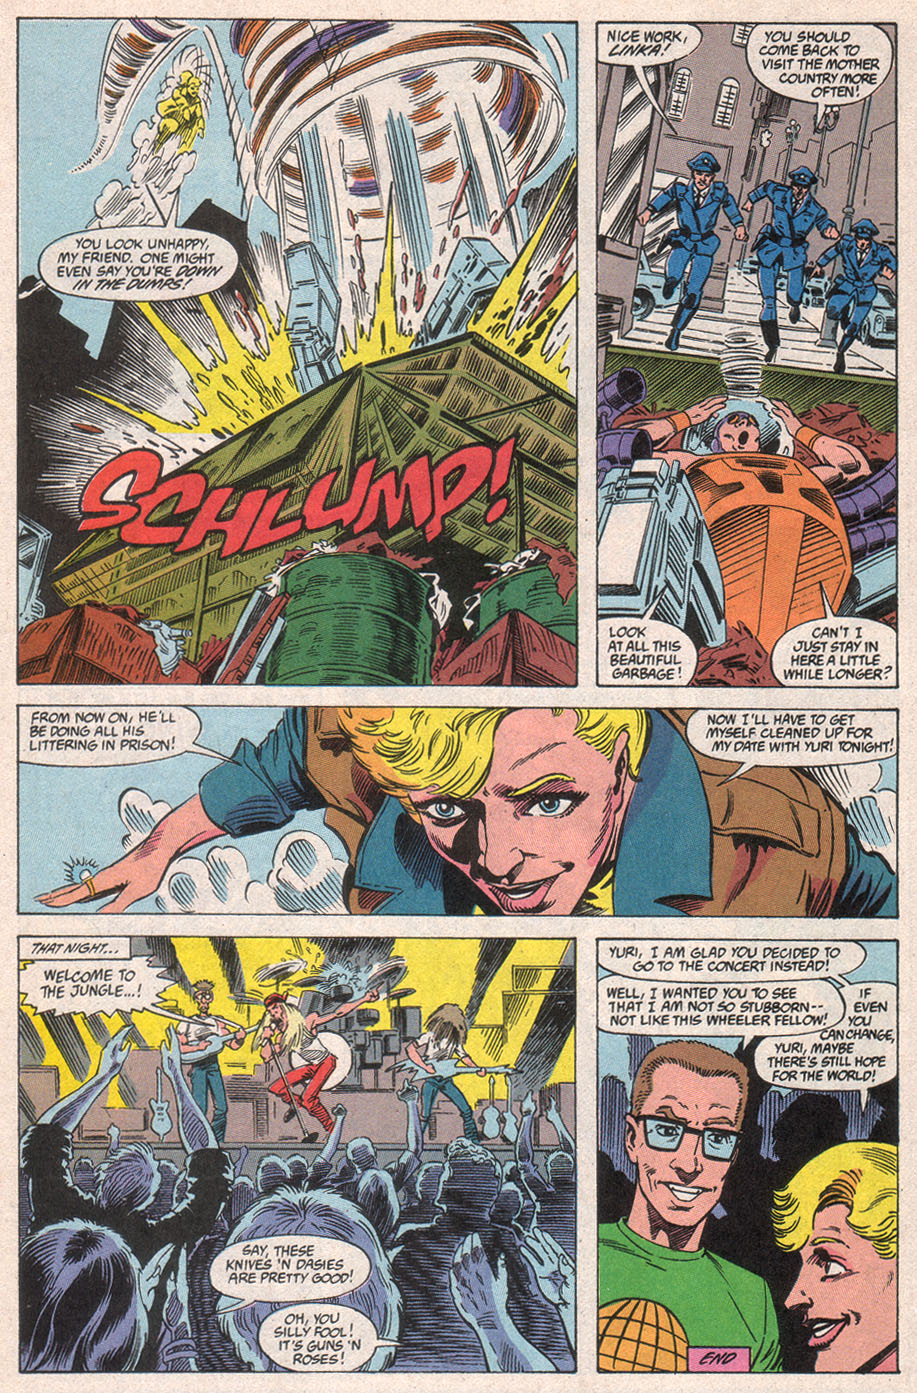 Captain Planet and the Planeteers 10 Page 29